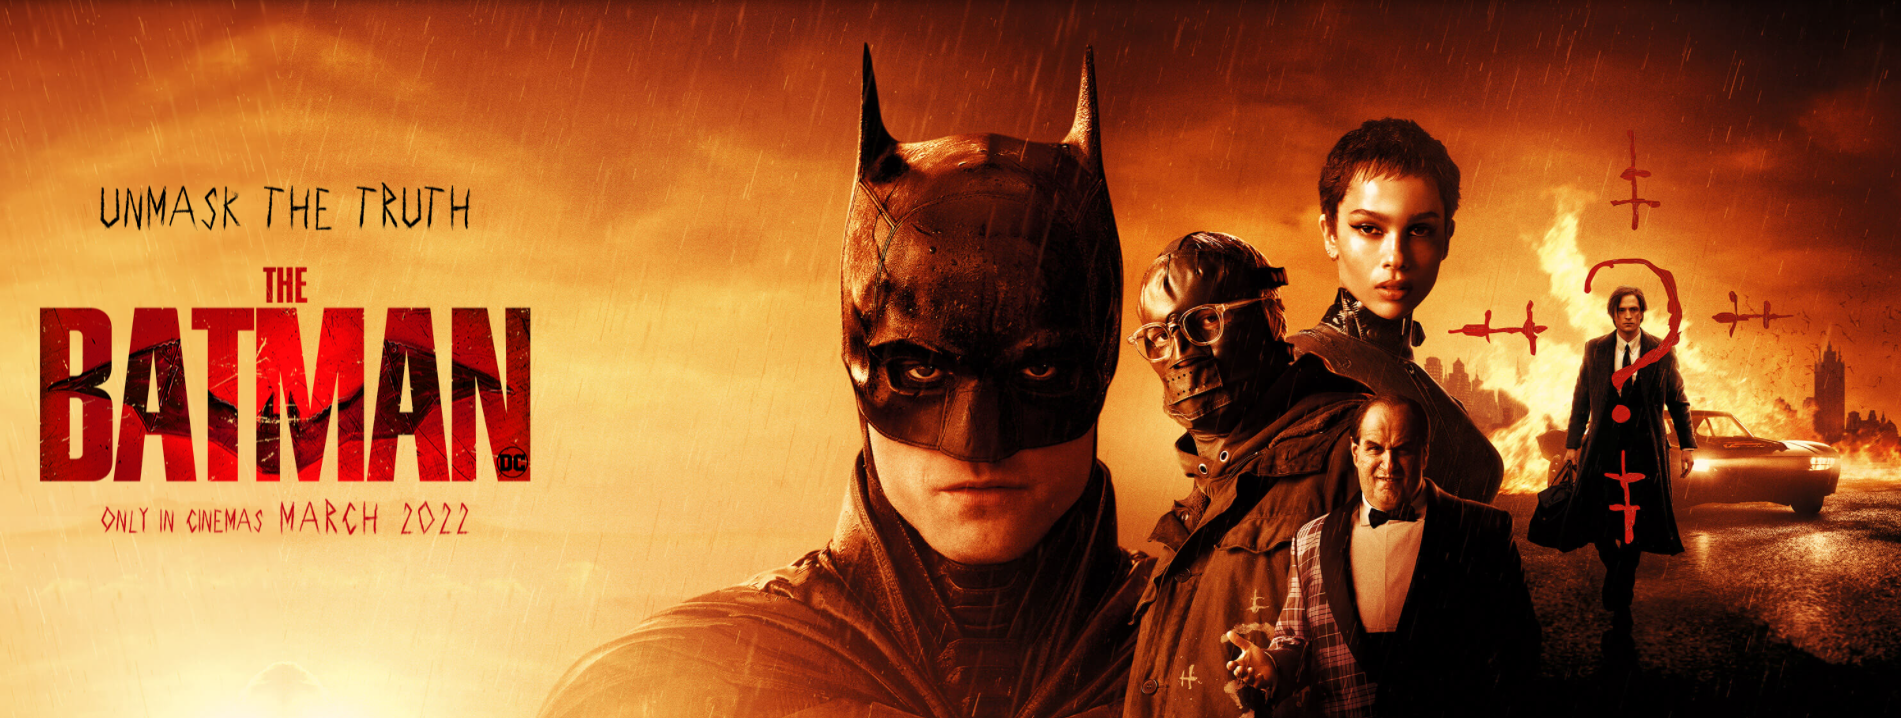 Five Key Things That Reeves Gets Right With The Batman